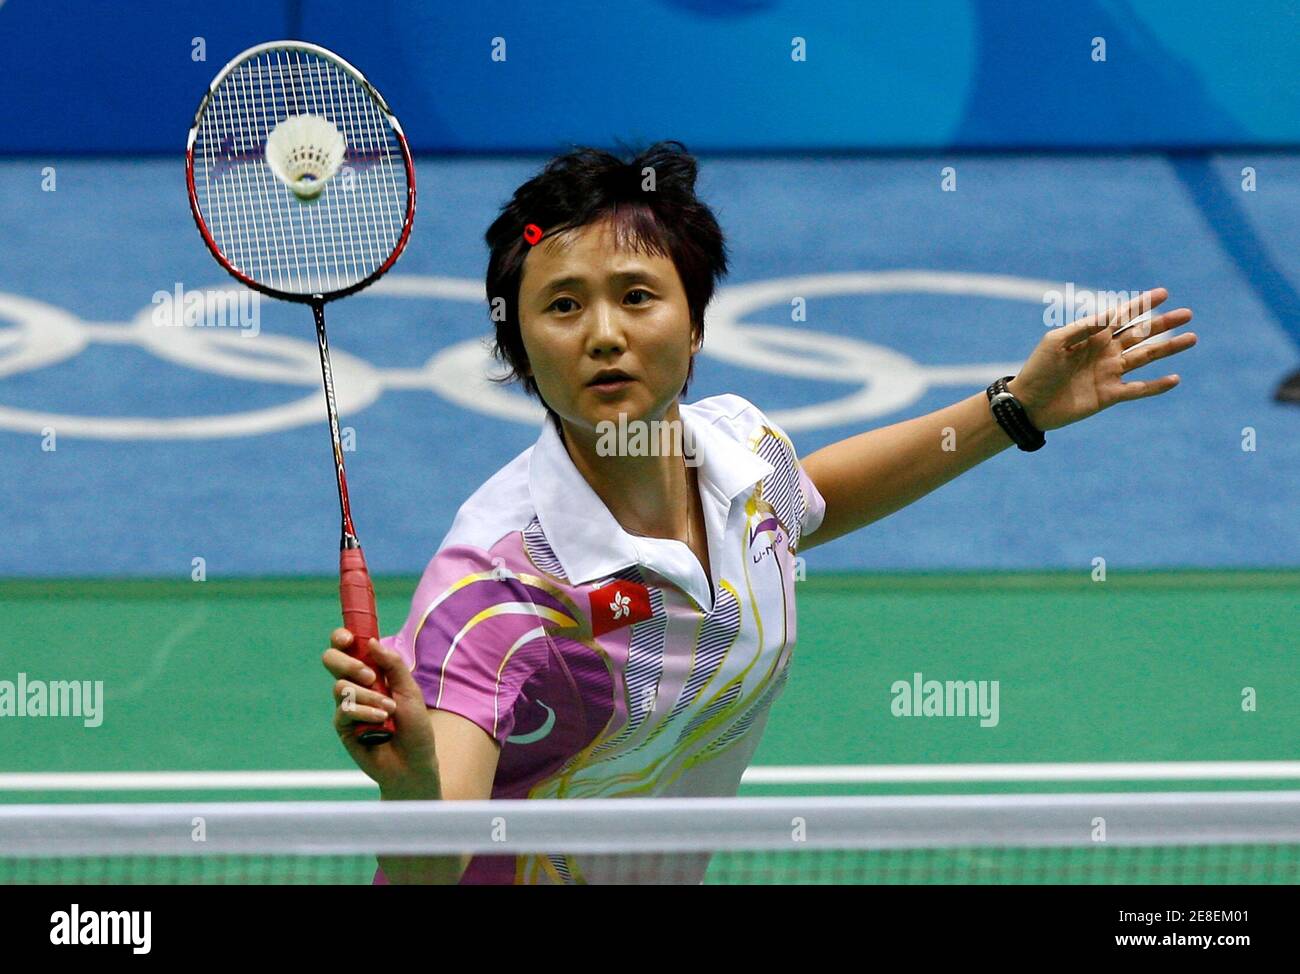 Wang Chen of Hong Kong returns a shot during her women's singles round of 32 badminton match against Eva Sladekova of Slovakia at the Beijing 2008 Olympic Games, August 10, 2008.     REUTERS/Beawiharta (CHINA) Stock Photo